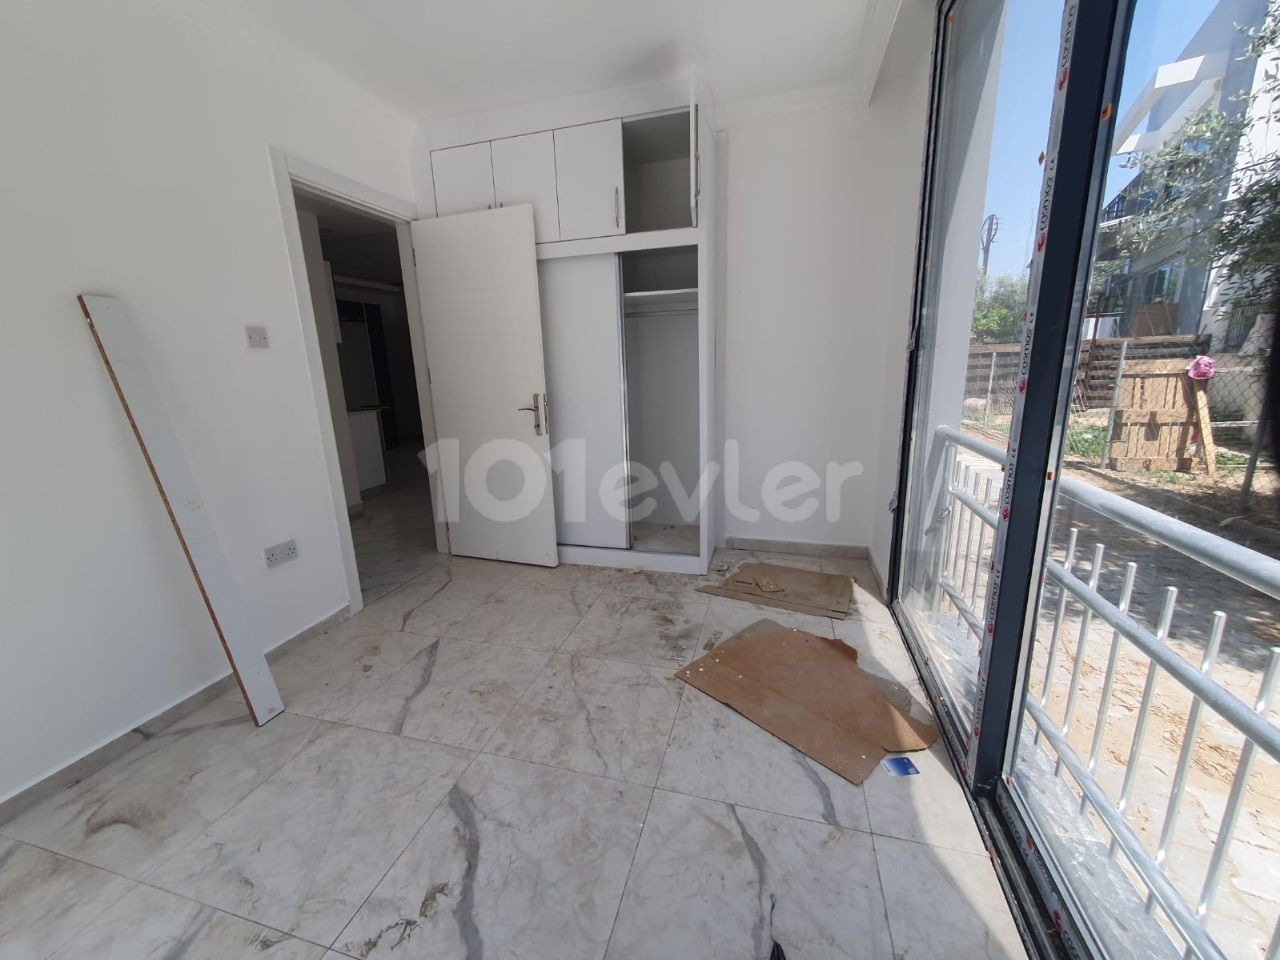 Garden floor 2+1 flat for sale in a complex with communal pool